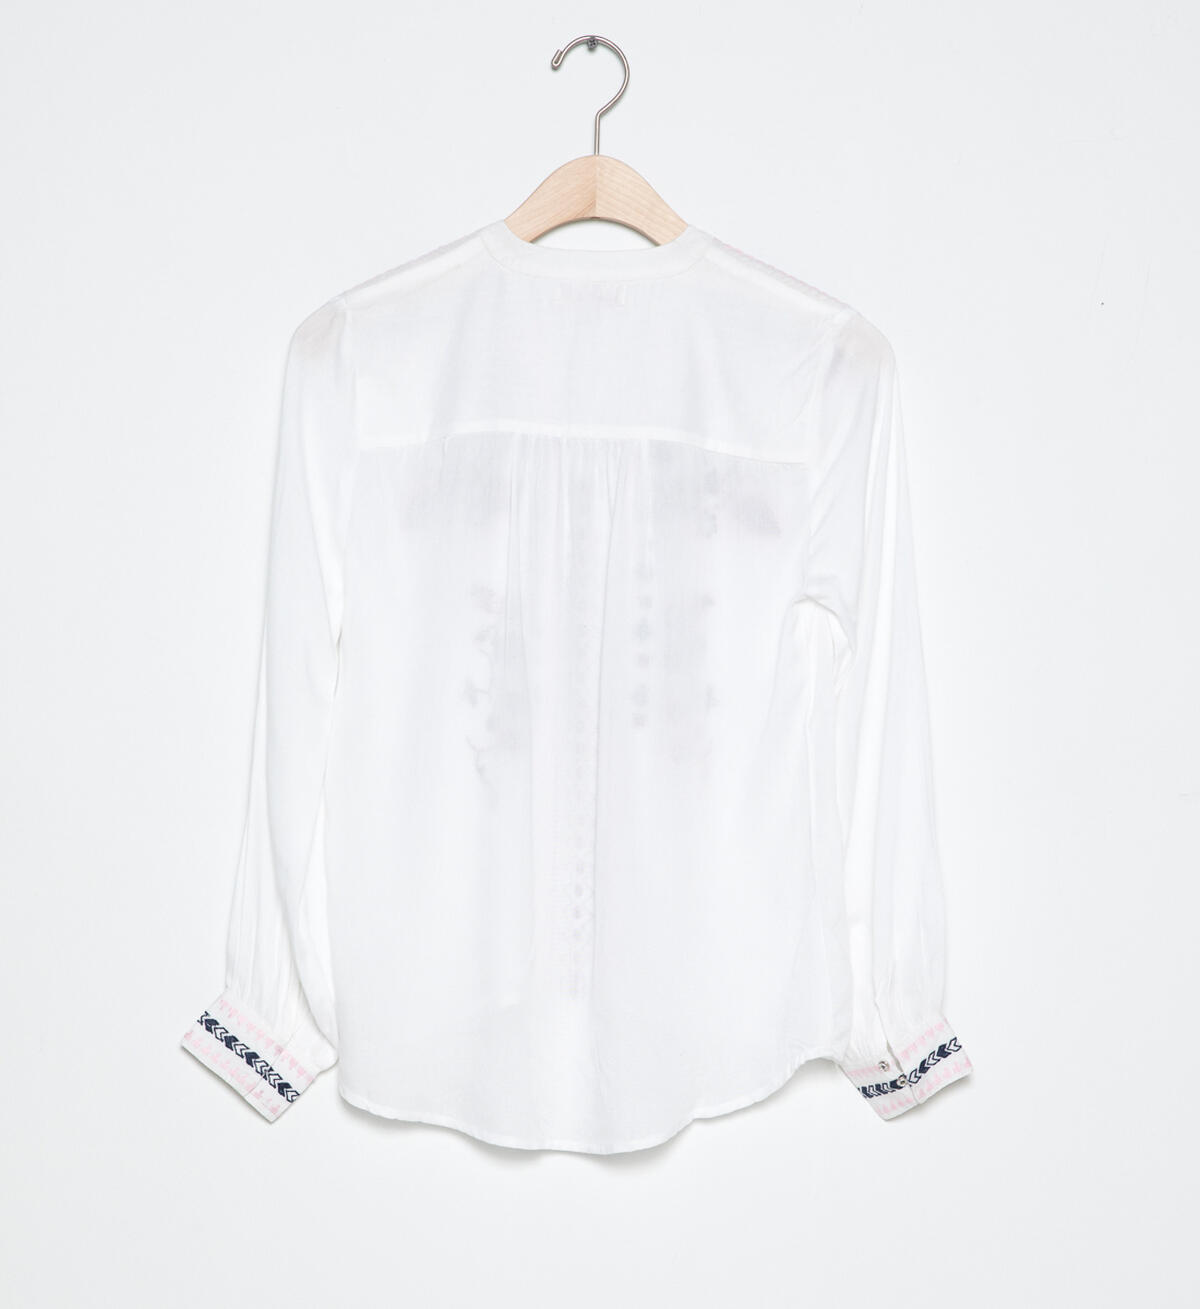 Long-Sleeve Embroidered Peasant Top (4-7), , hi-res image number 1